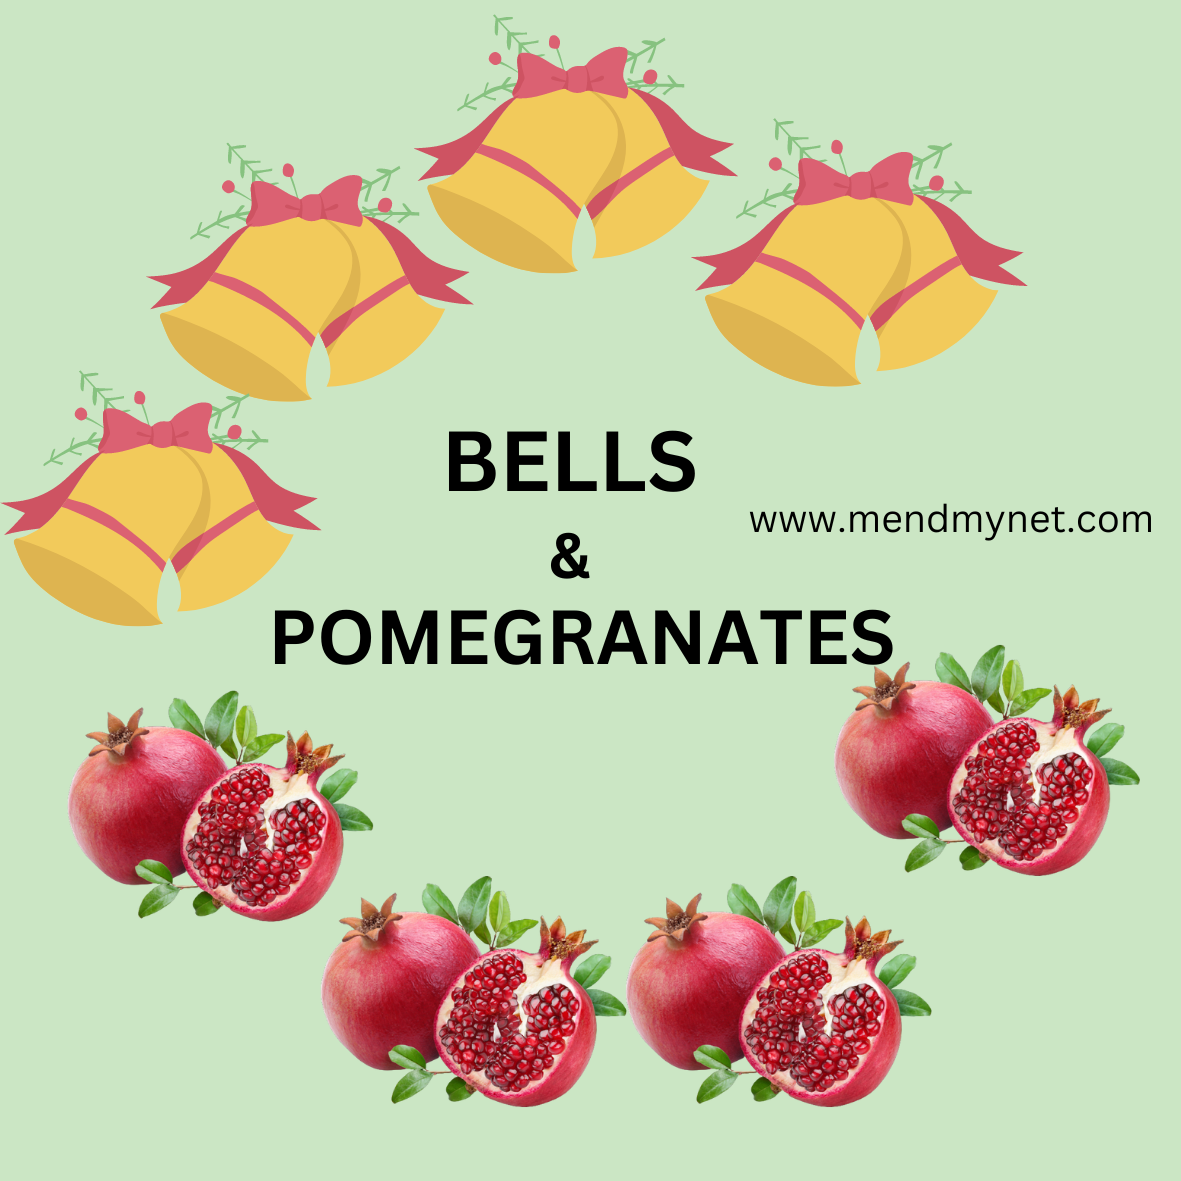 BELLS AND POMEGRANATES: You need character as much as your gifts